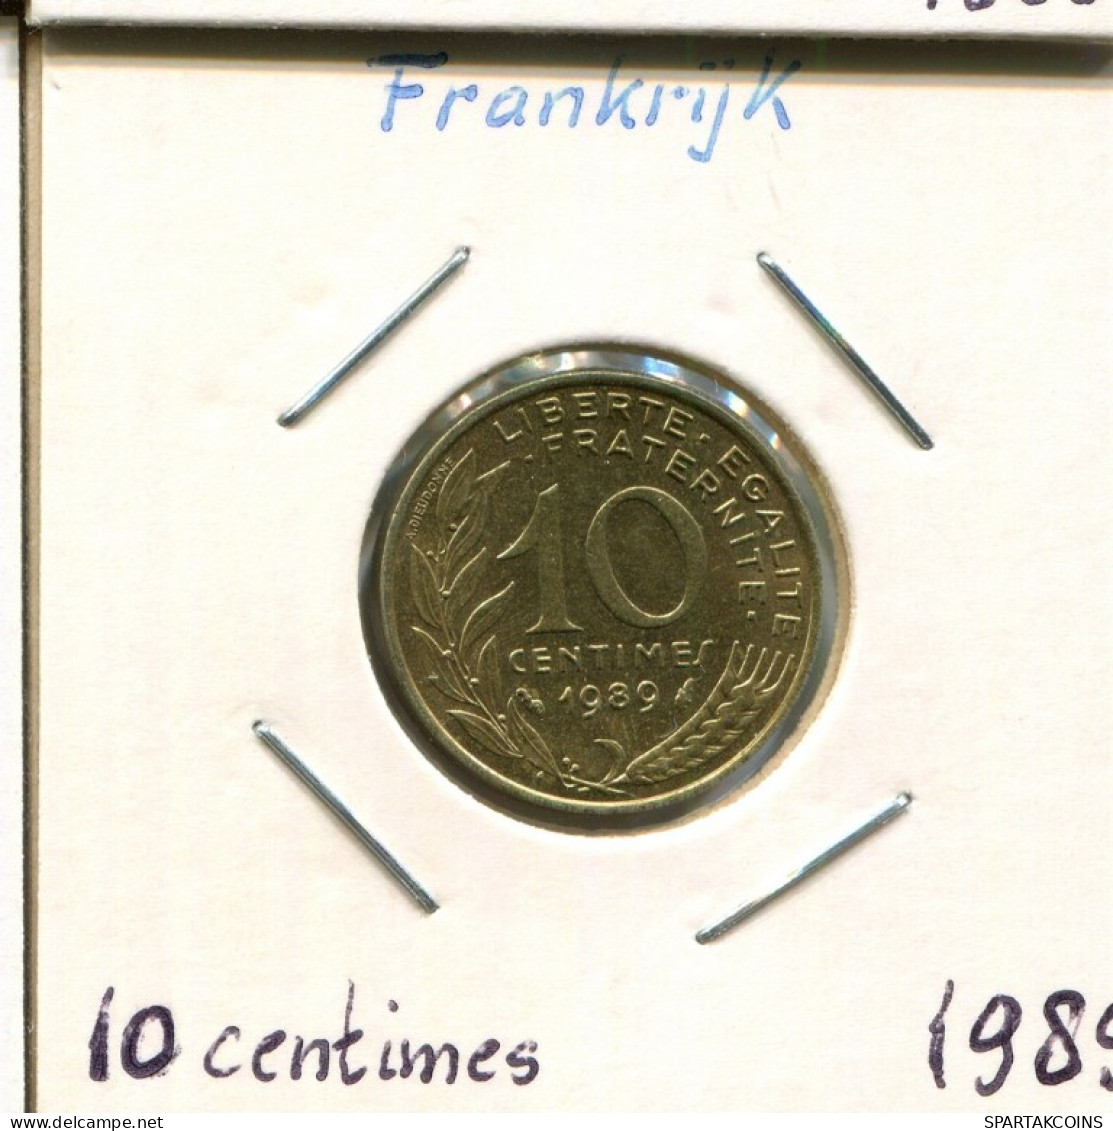 10 CENTIMES 1989 FRANCE Coin French Coin #AM143.U.A - 10 Centimes